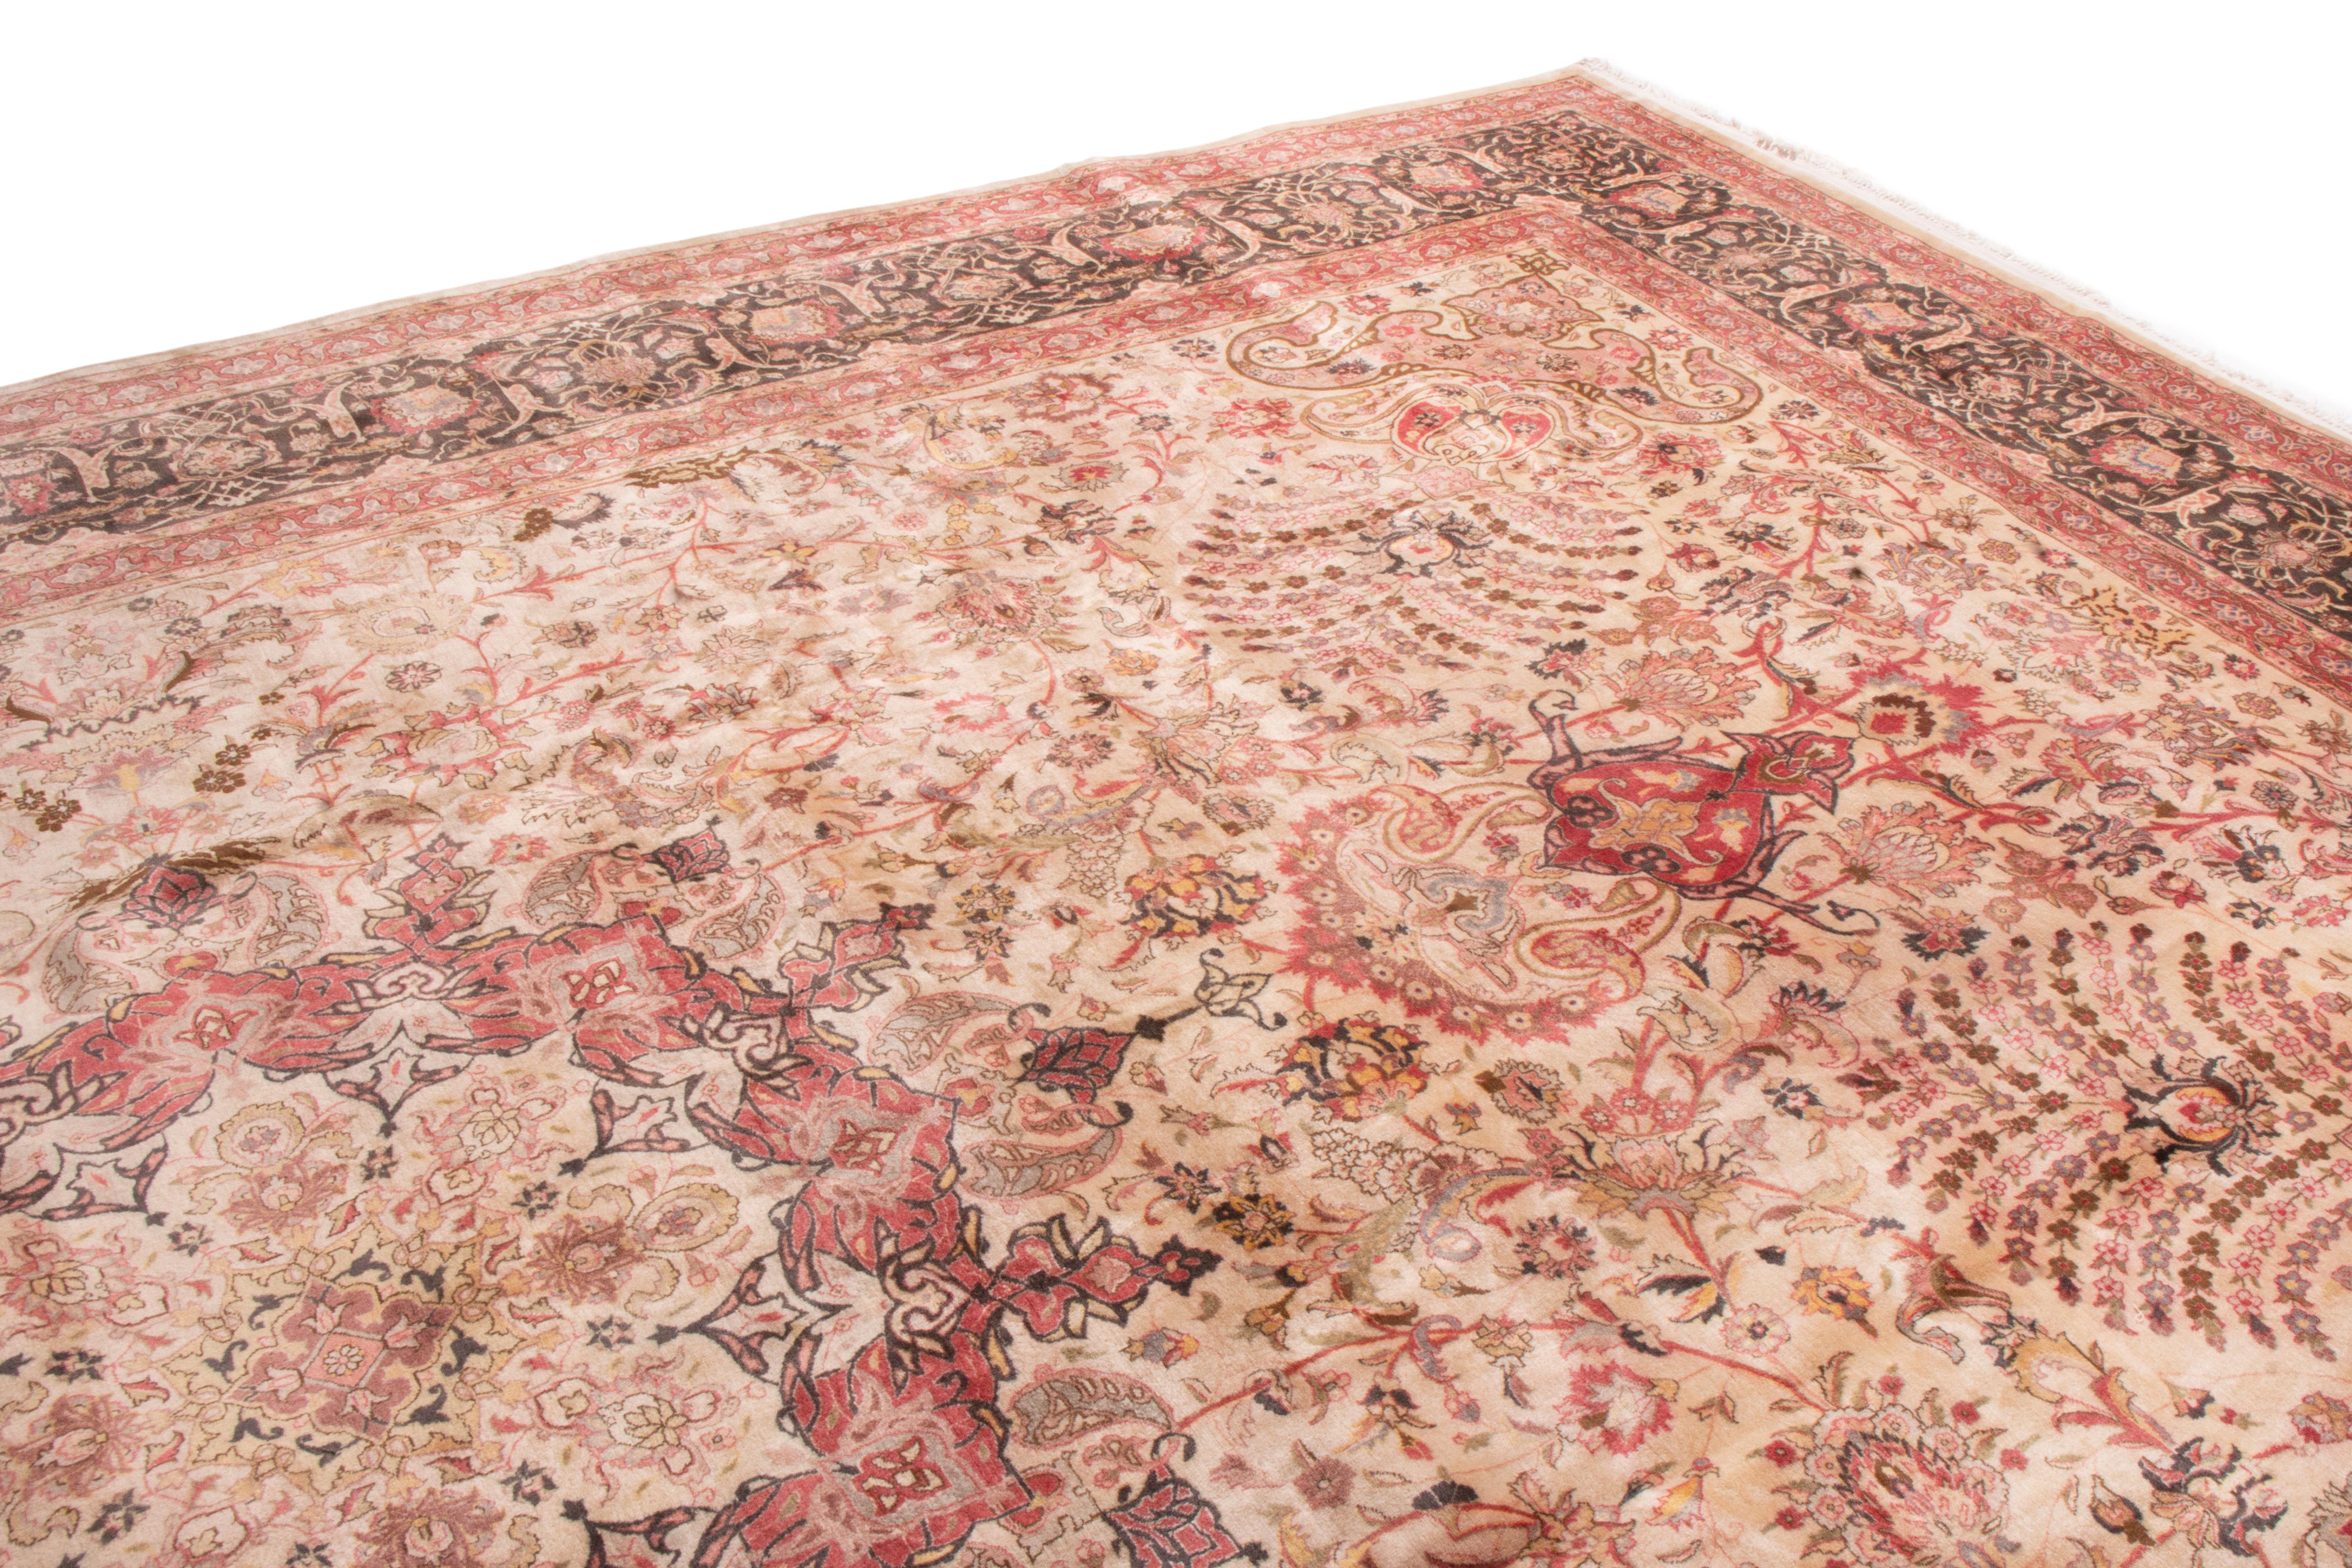 This antique Tabriz wool rug has originates from India in the 1960s. The uncommon choice of pink is accented by burgundy and beige throughout the field and border, both of which feature transitional curvilinear garlands and vine scroll patterns. As